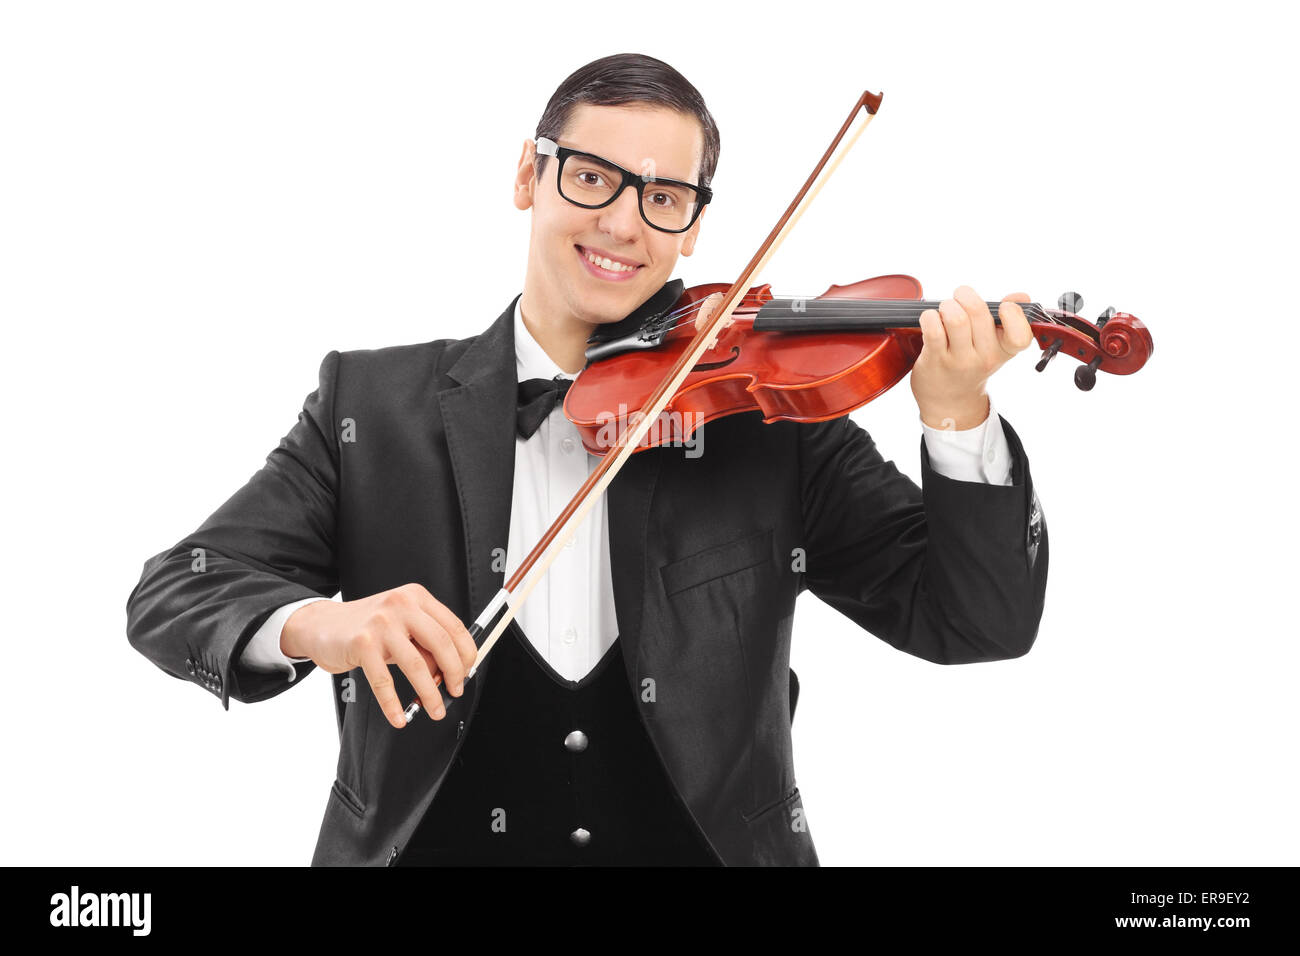 Cheerful young violinist playing an acoustic violin isolated on white background Stock Photo